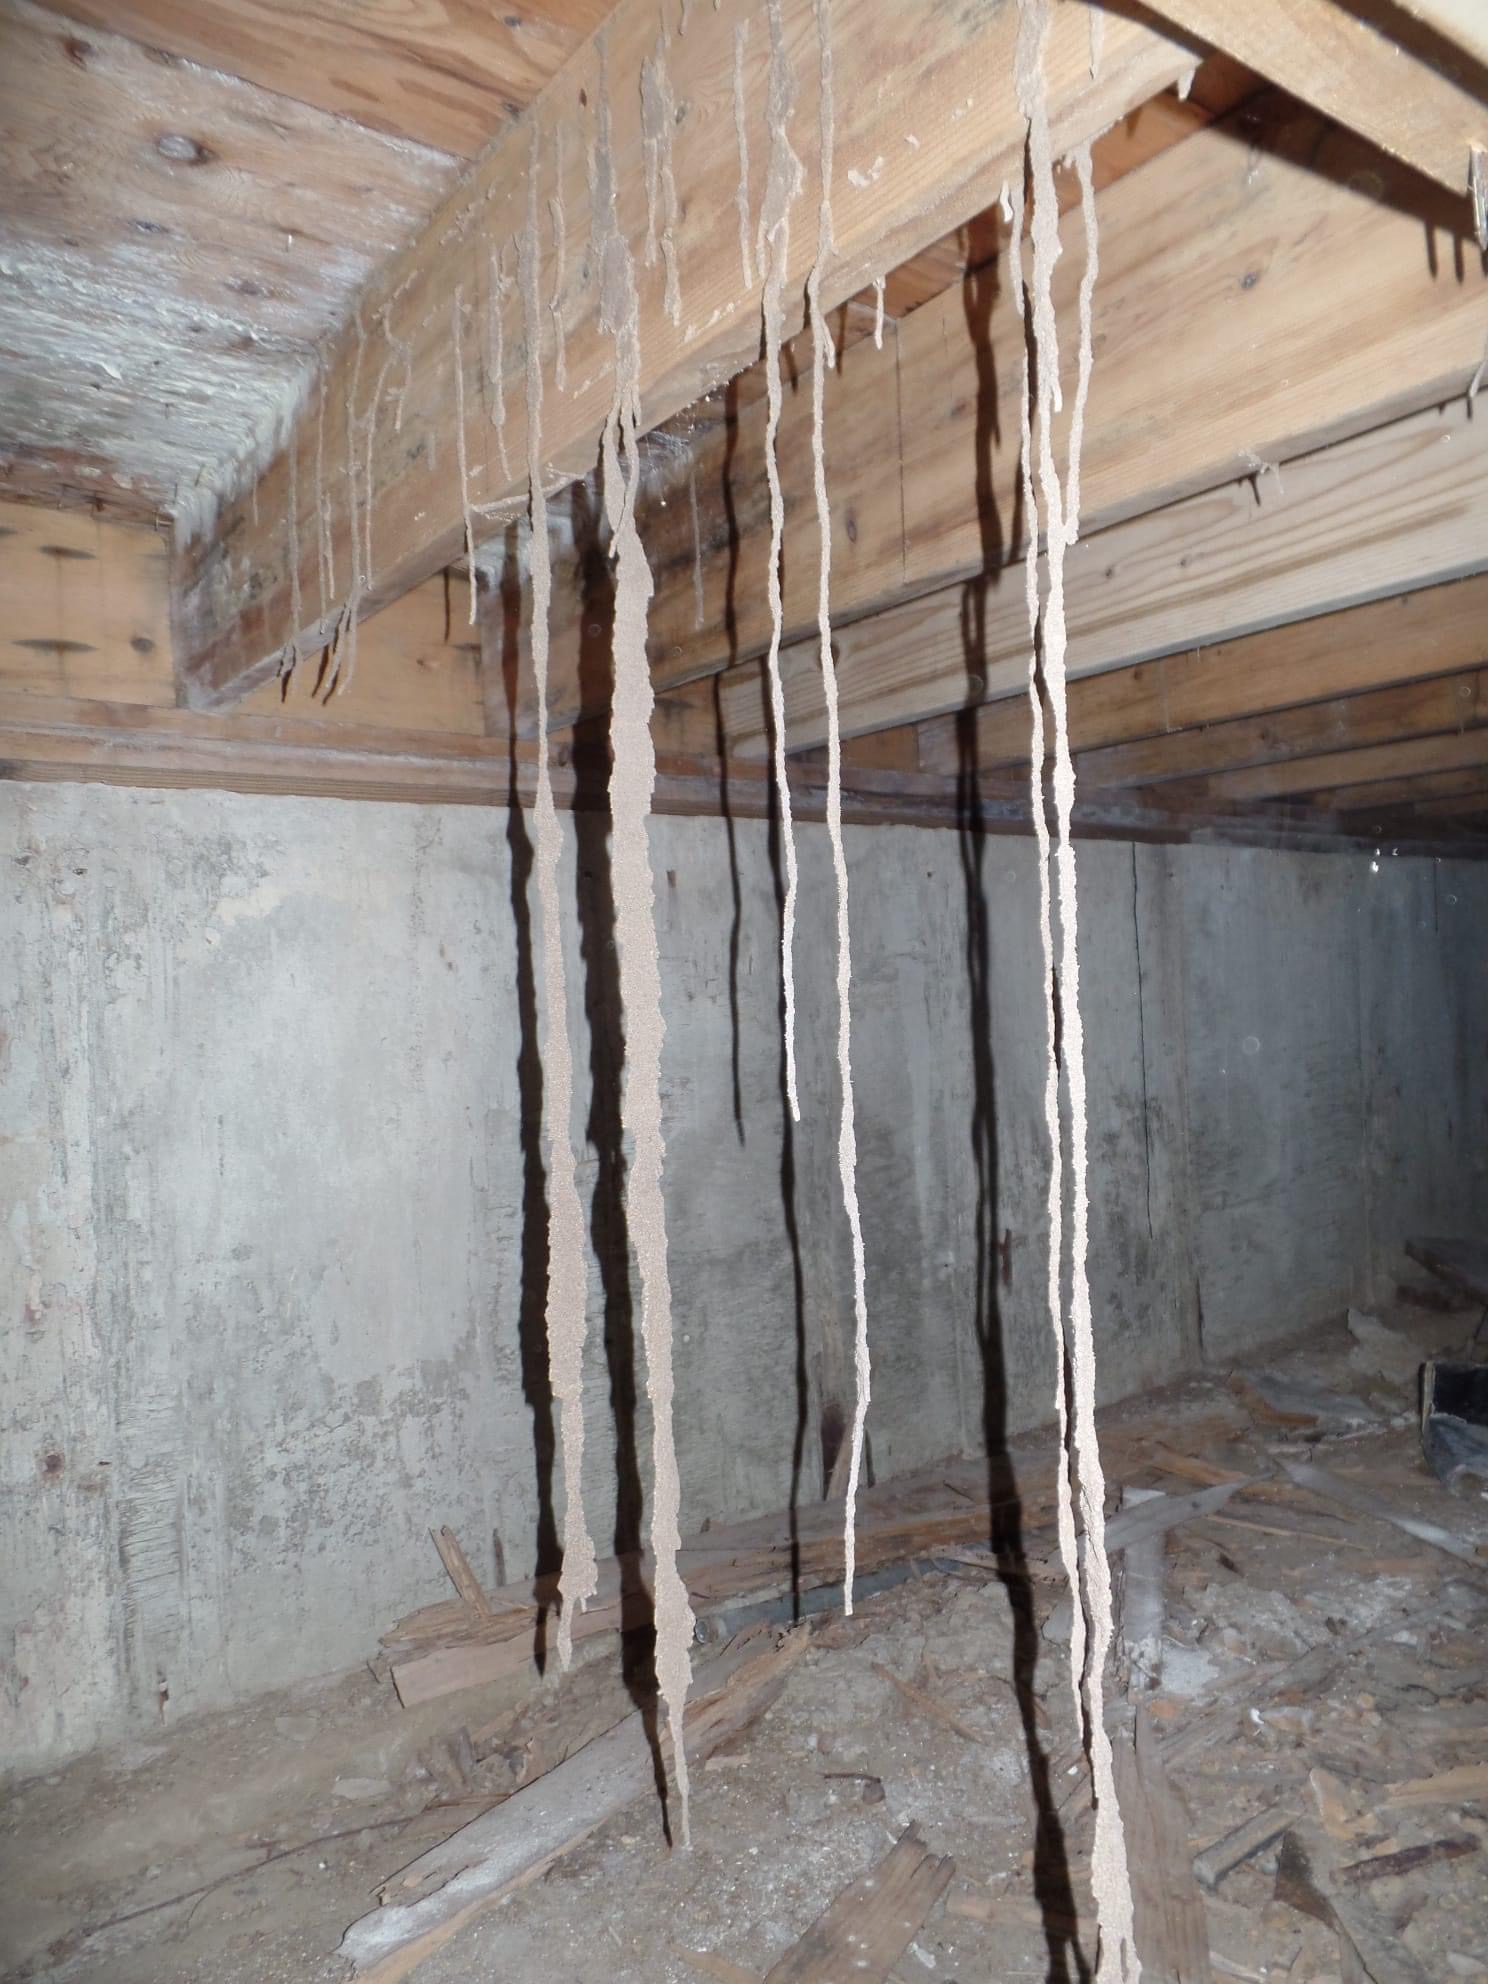 Termite tubes under a house